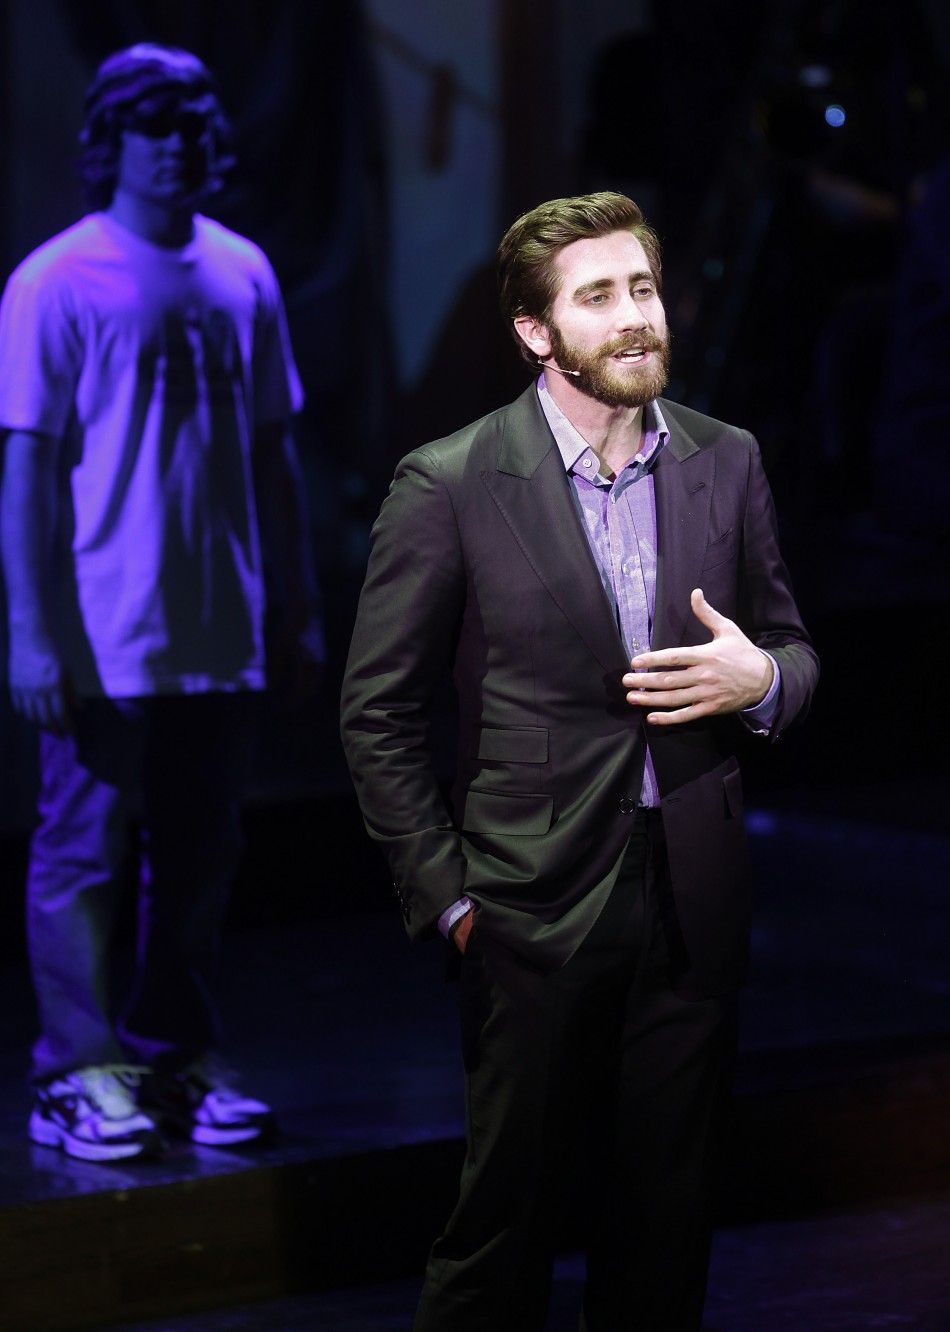 Jake Gyllenhaal, Tina Fey and Other Celebs at A Celebration of Paul Newmans Dream 